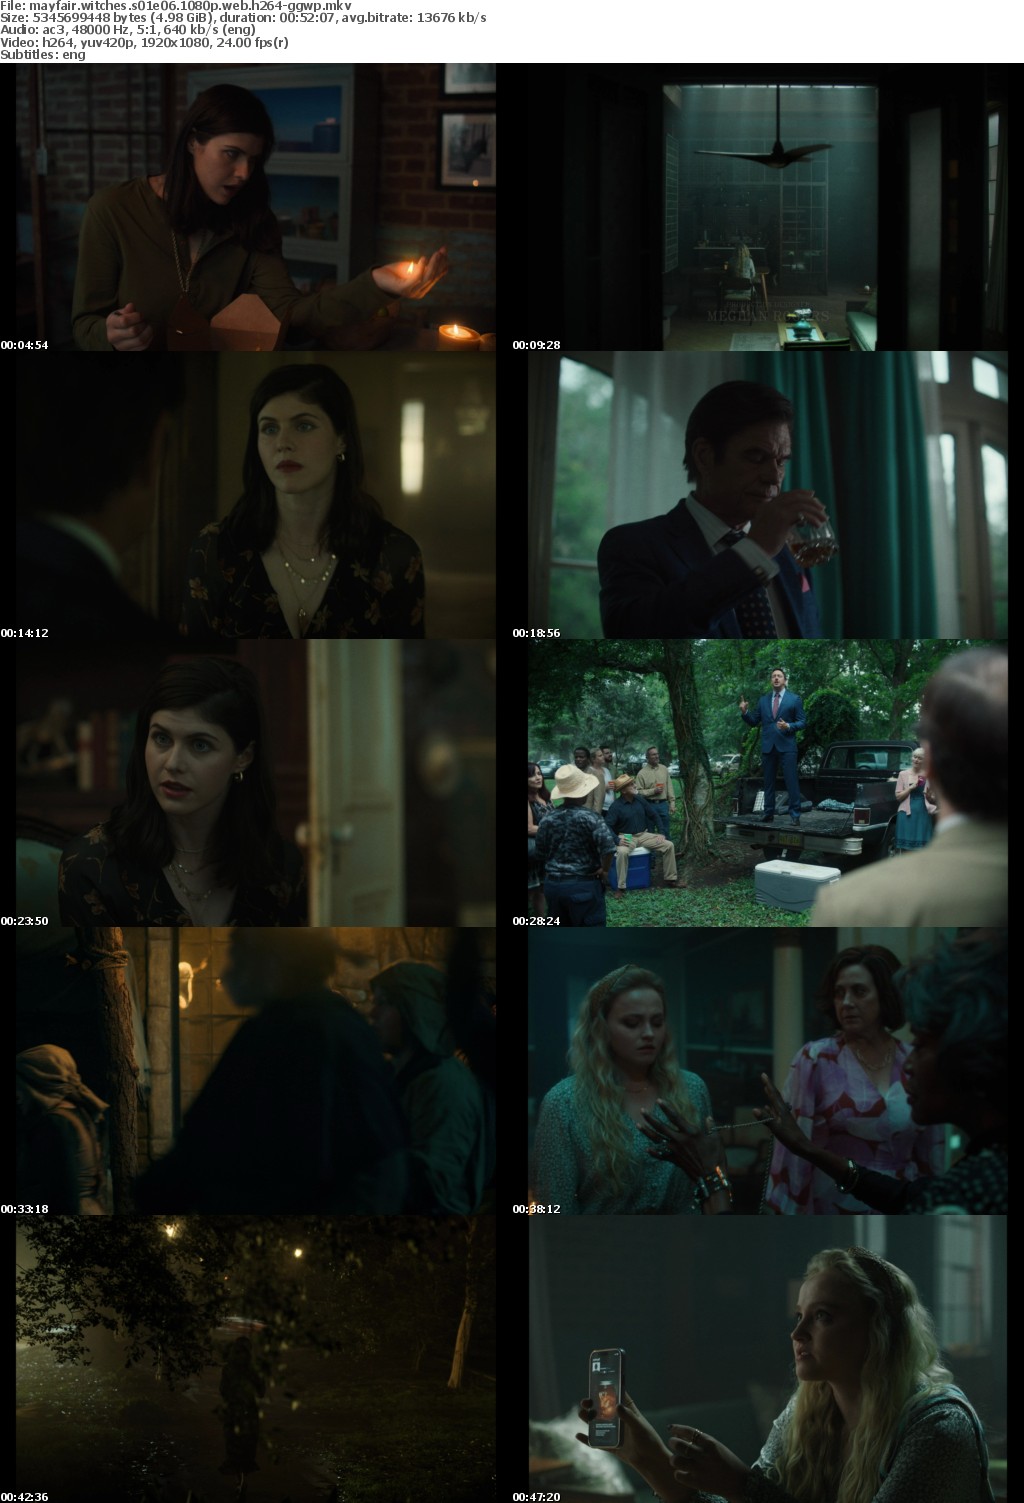 Mayfair Witches S01E06 1080p WEB H264-GGWP